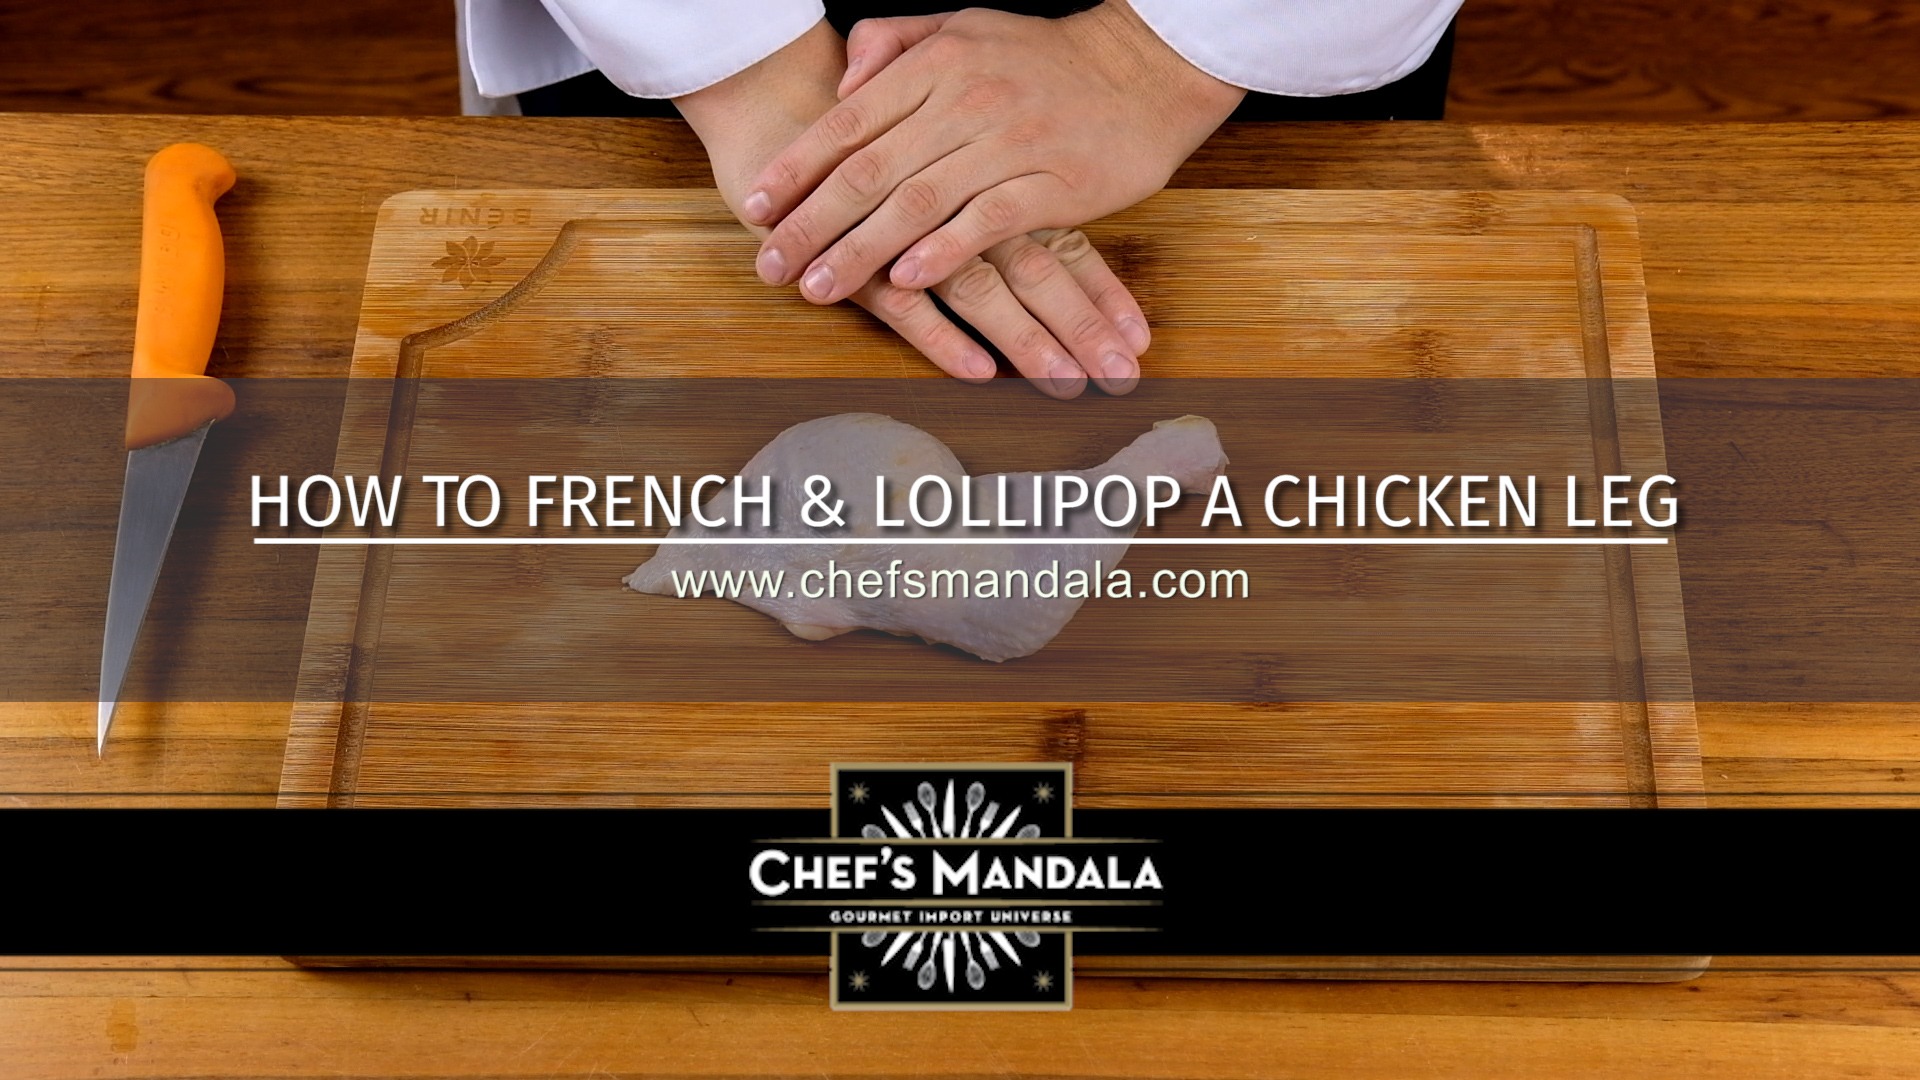 How to French and lollipop a chicken leg